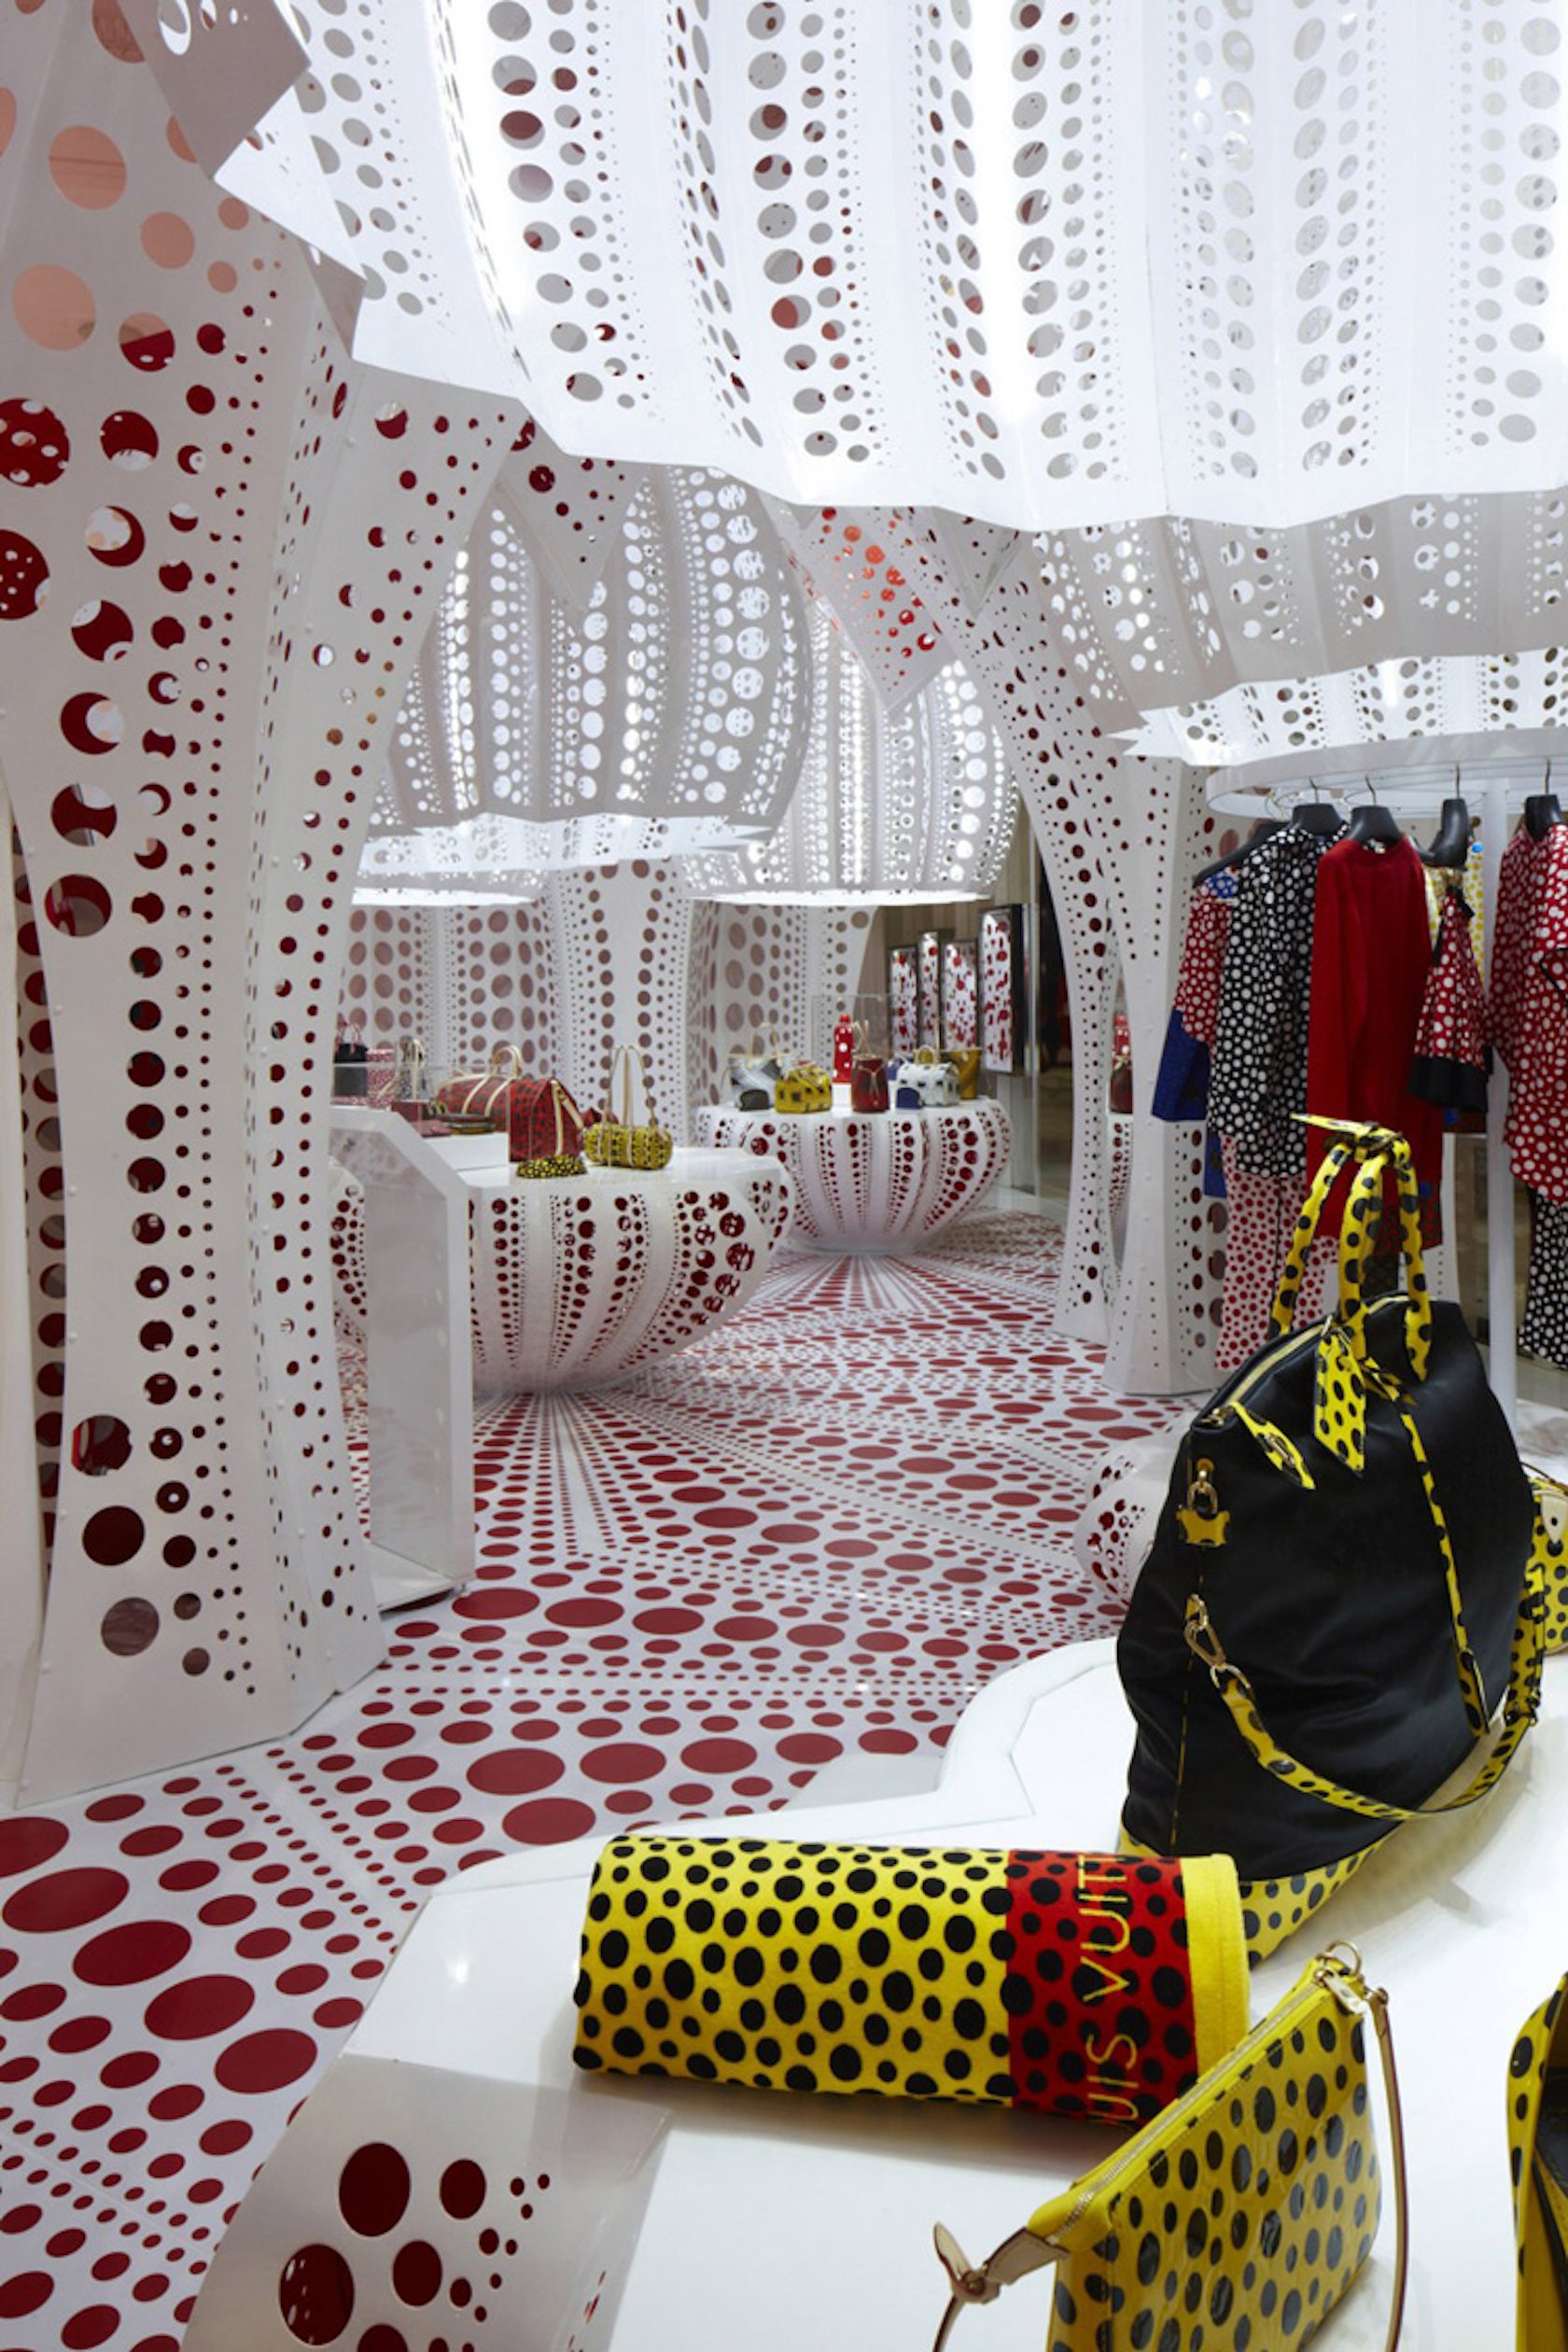 Selfridges - It's time to turn heads. Enter the magical world Yayoi Kusama.  The Louis Vuitton pop-up store is filled with pumpkins inspired by her  artwork and a stunning collection of exclusive